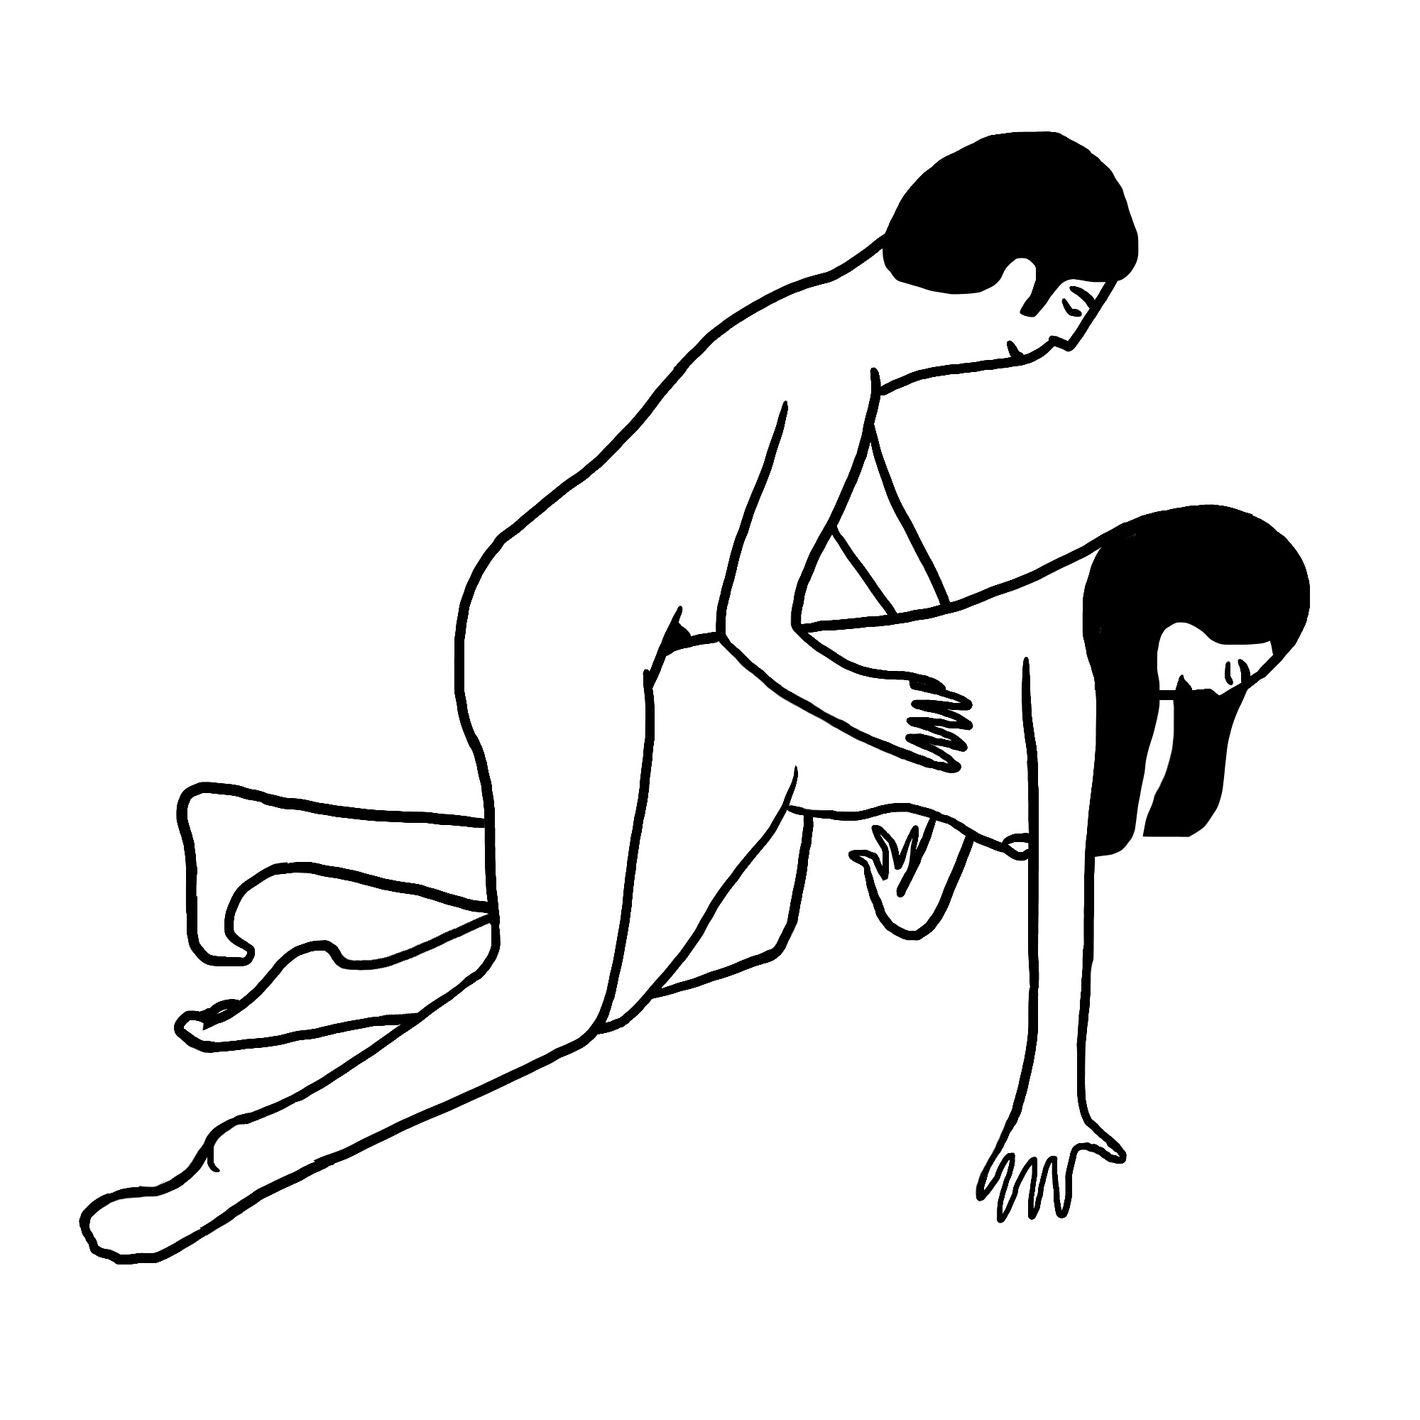 Types of fucking positions.